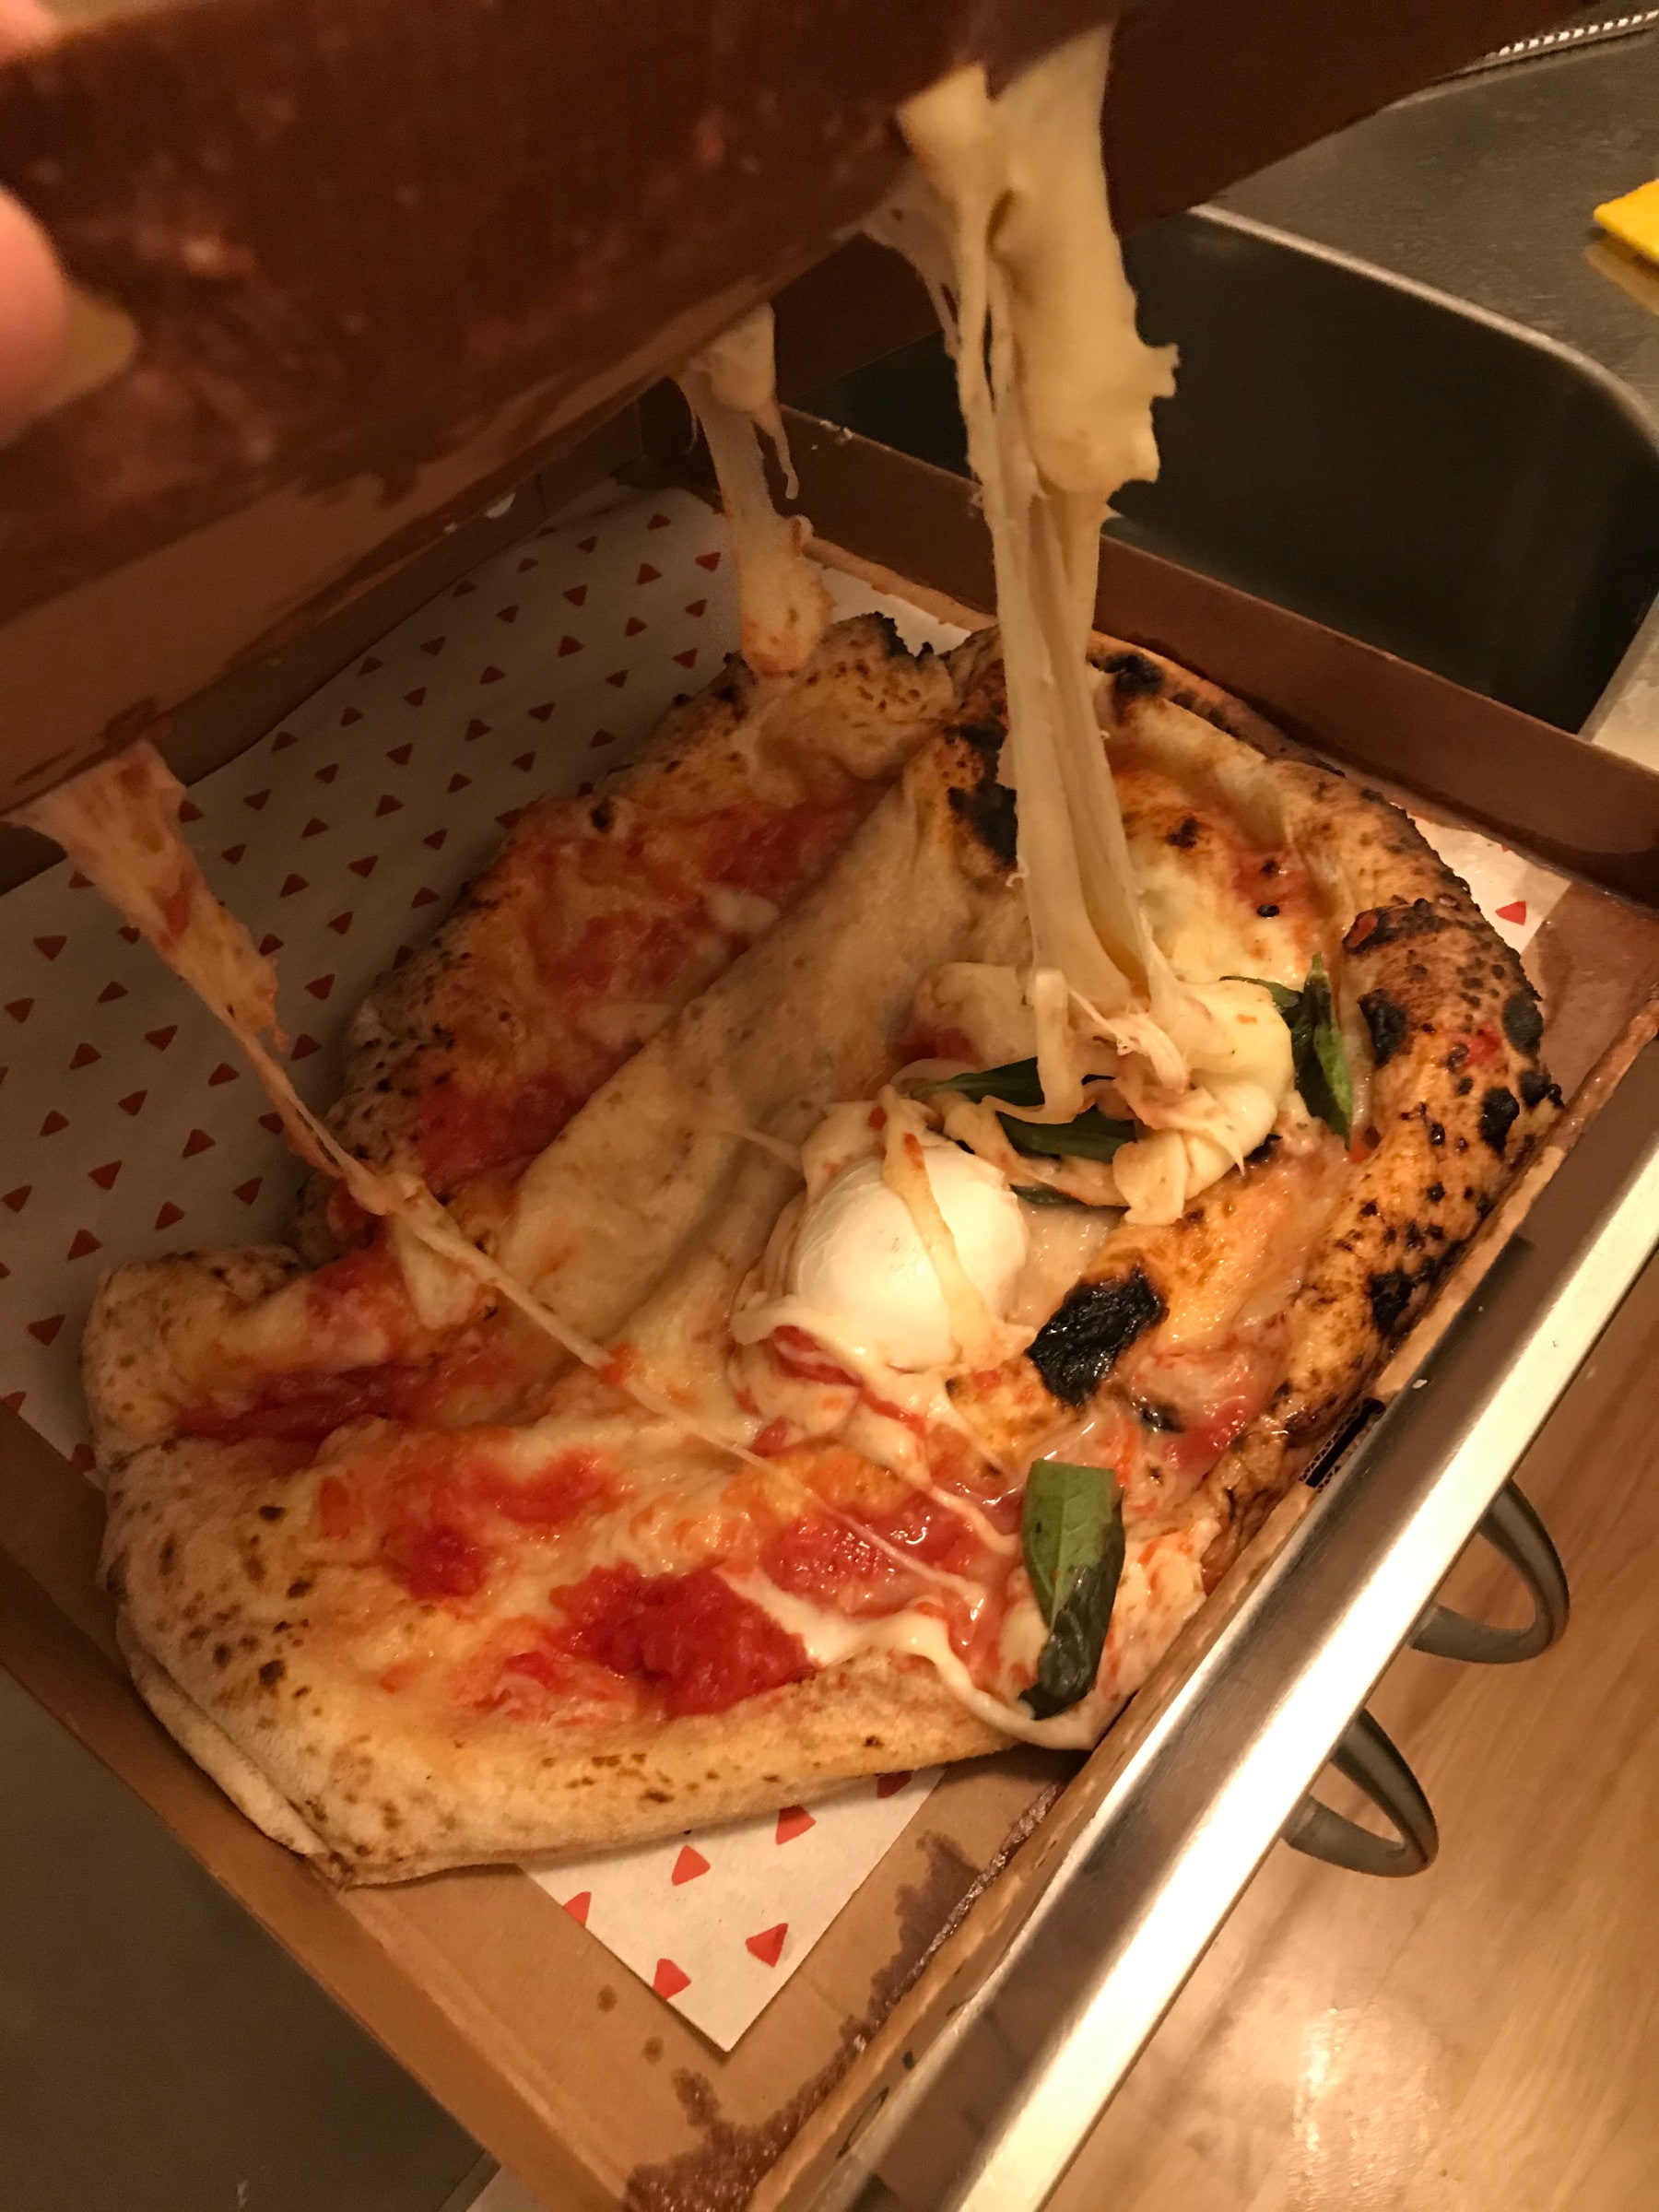 Worst Pizza in history – Photo from Meno Male Kungsholmen by Sanna C. (10/03/2021)